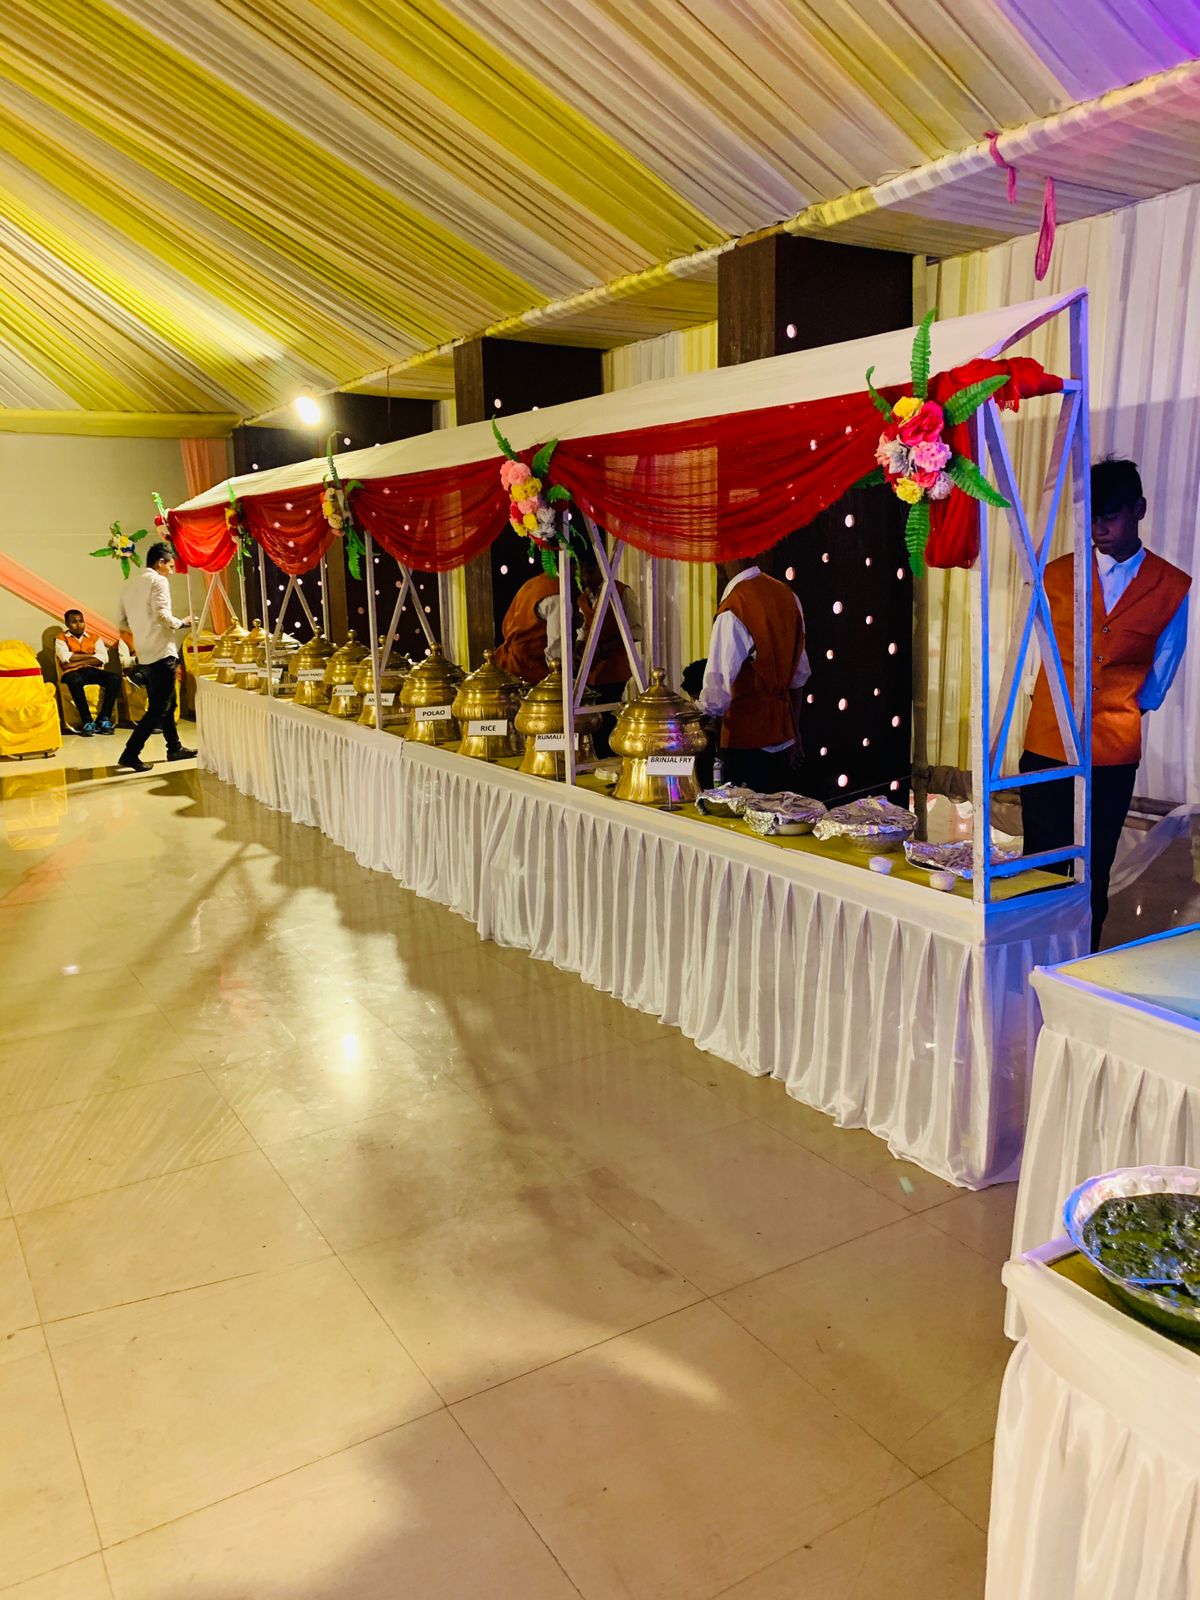 Assam Bengal catering service